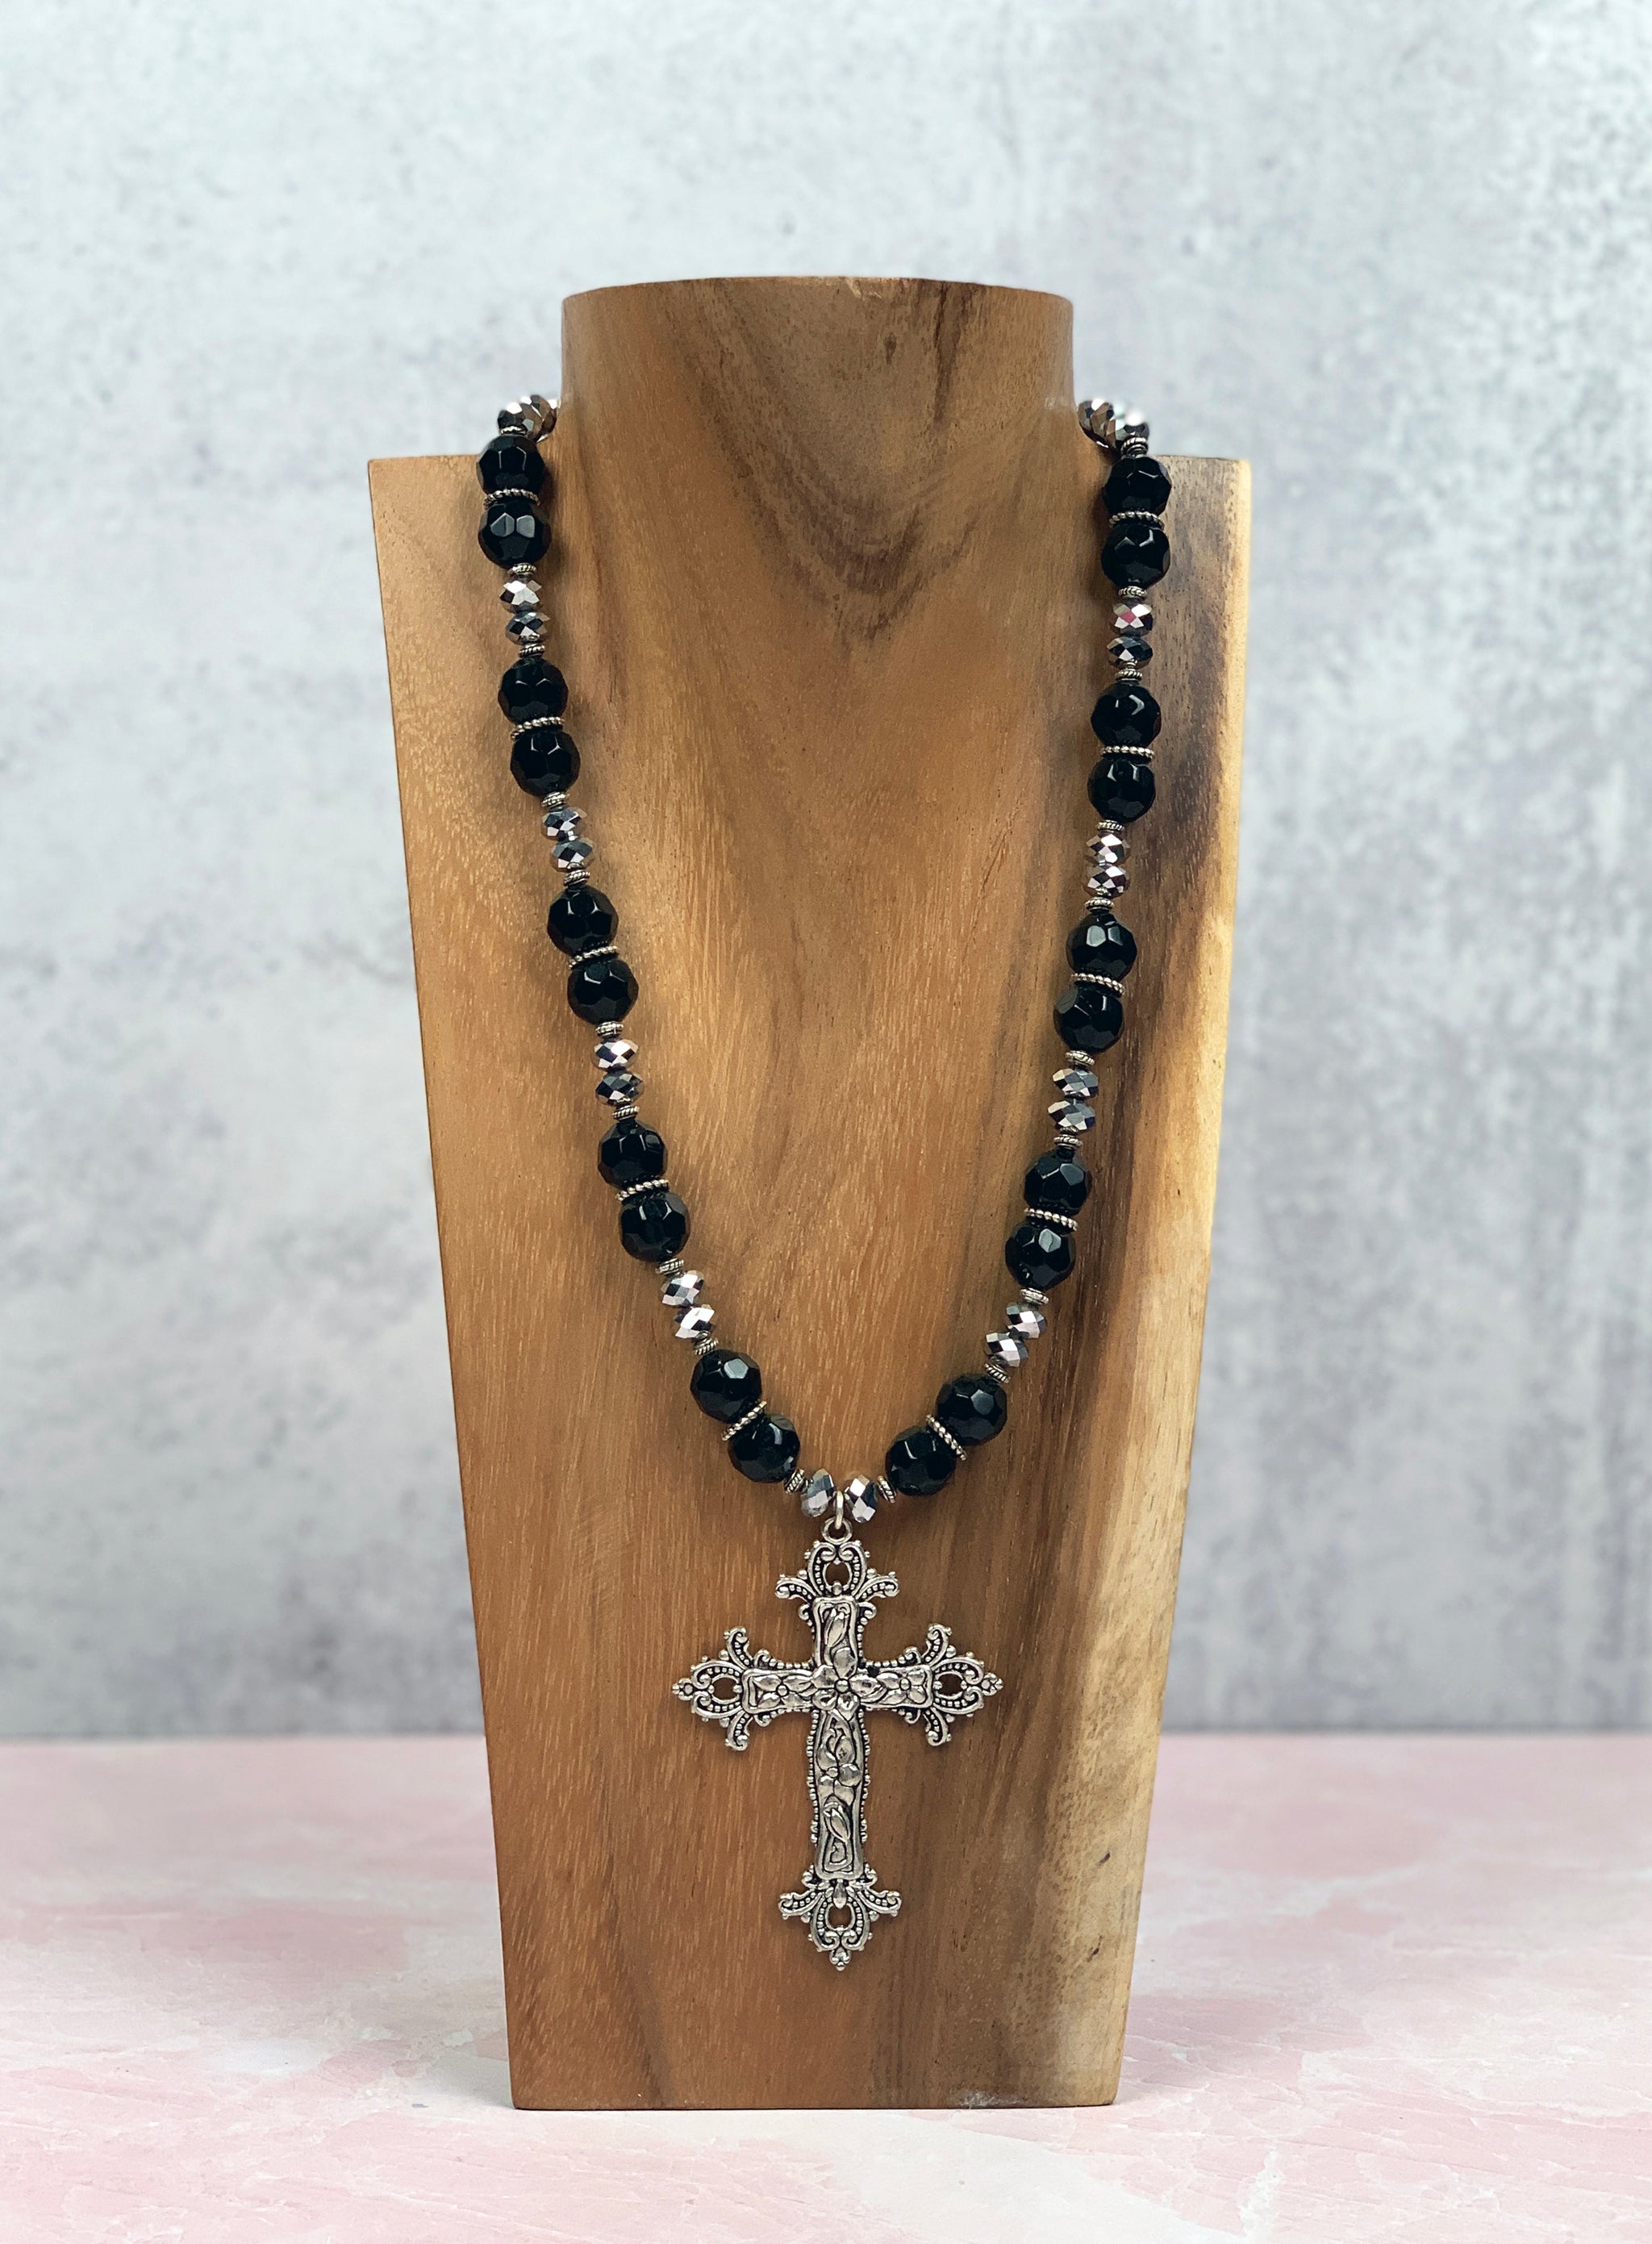 African Sandcast Beads with Sterling Cross Pendant | Fierce and Free Jewelry